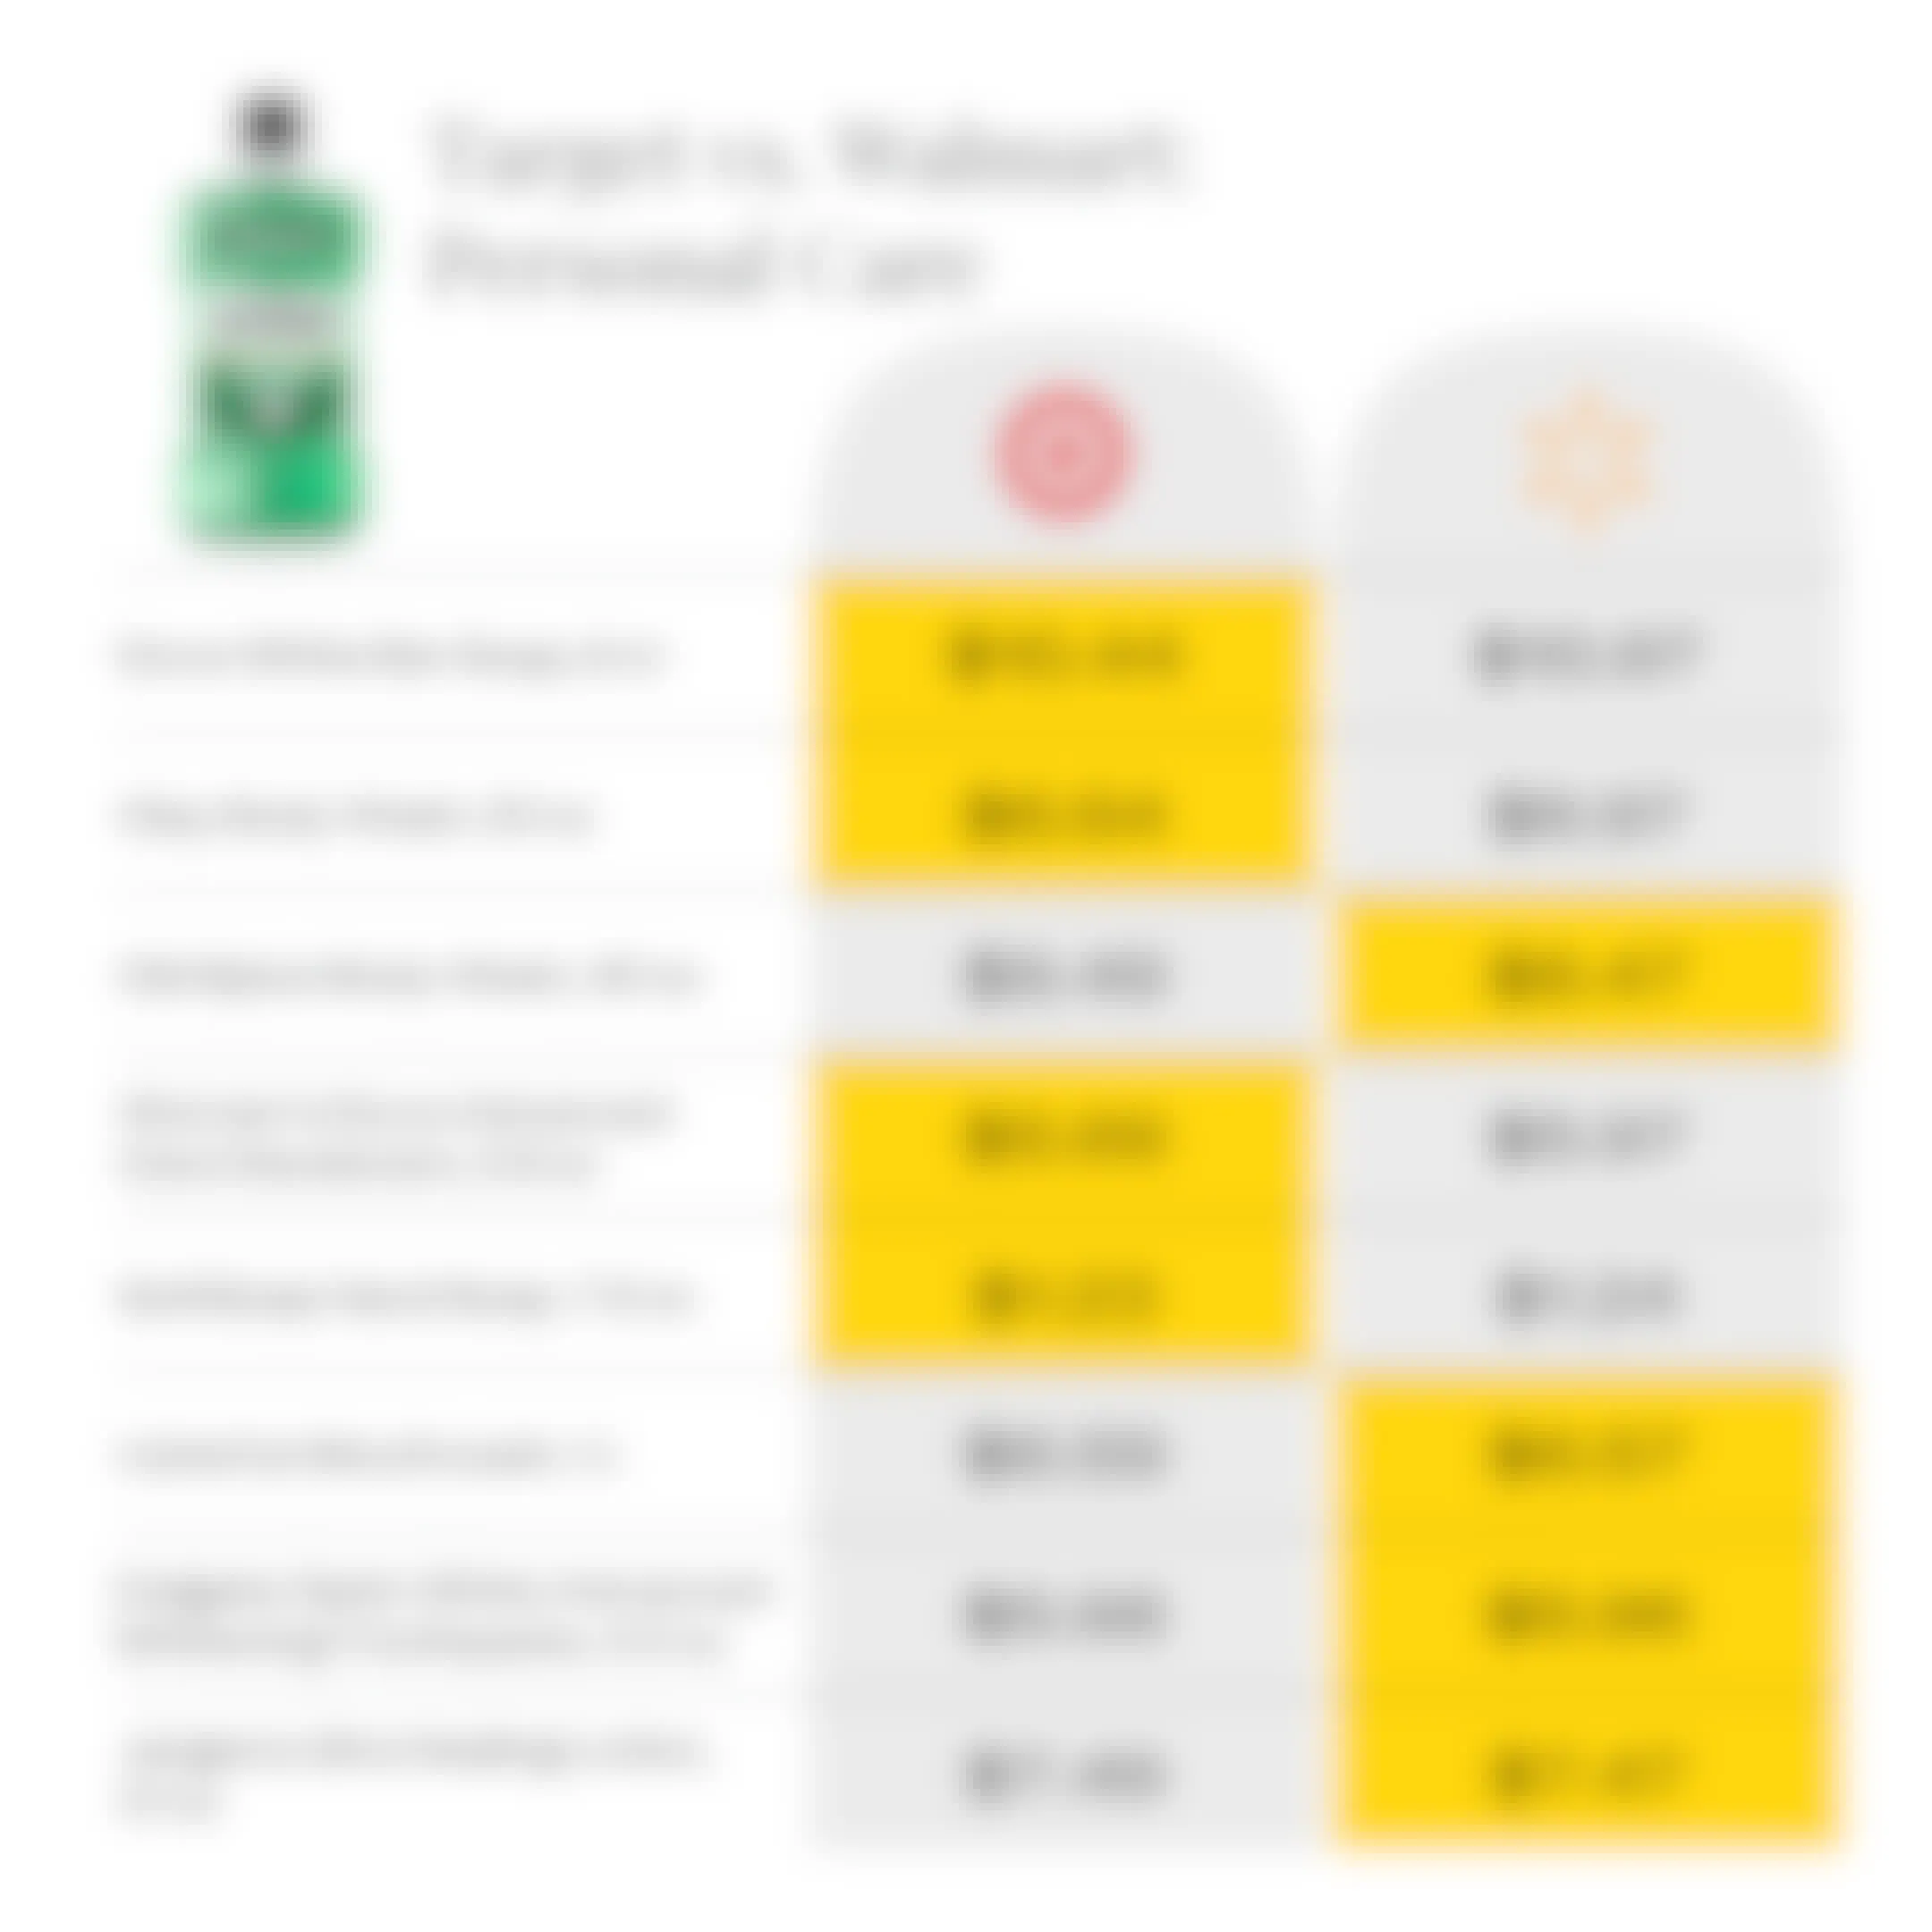 price comparison for personal care items at Target and Walmart